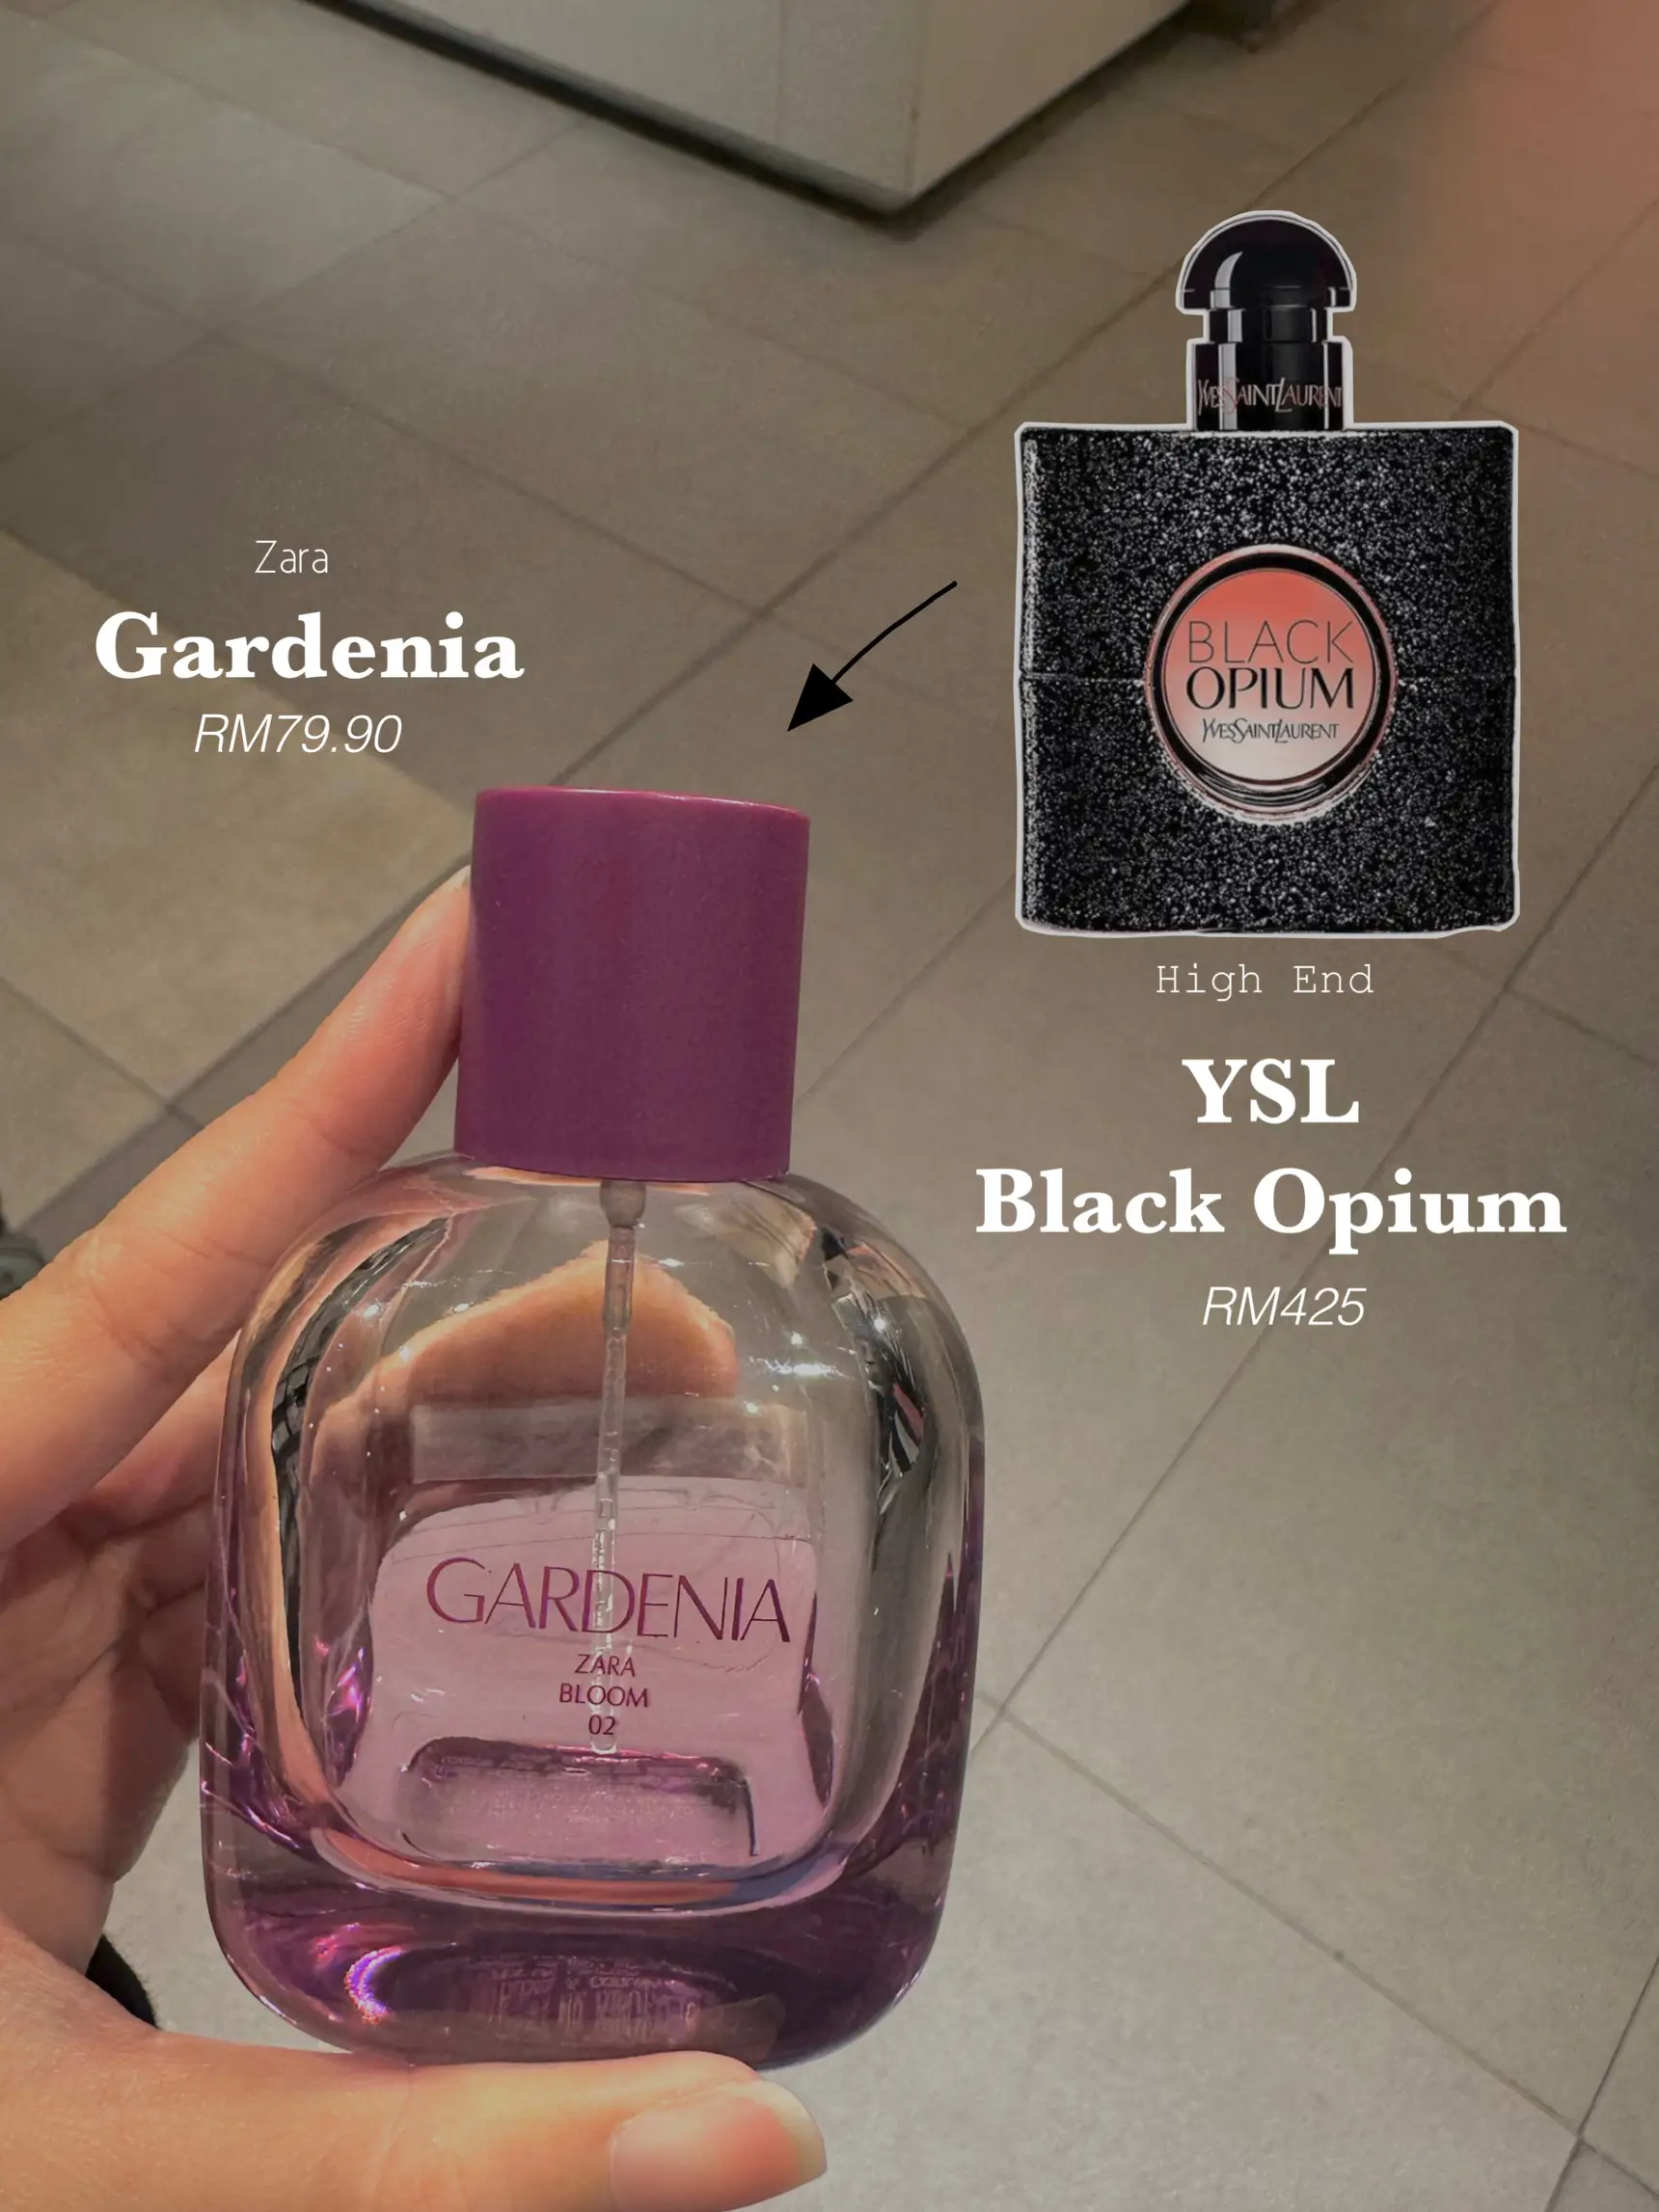 Zara Perfume as Dupes, Gallery posted by luna